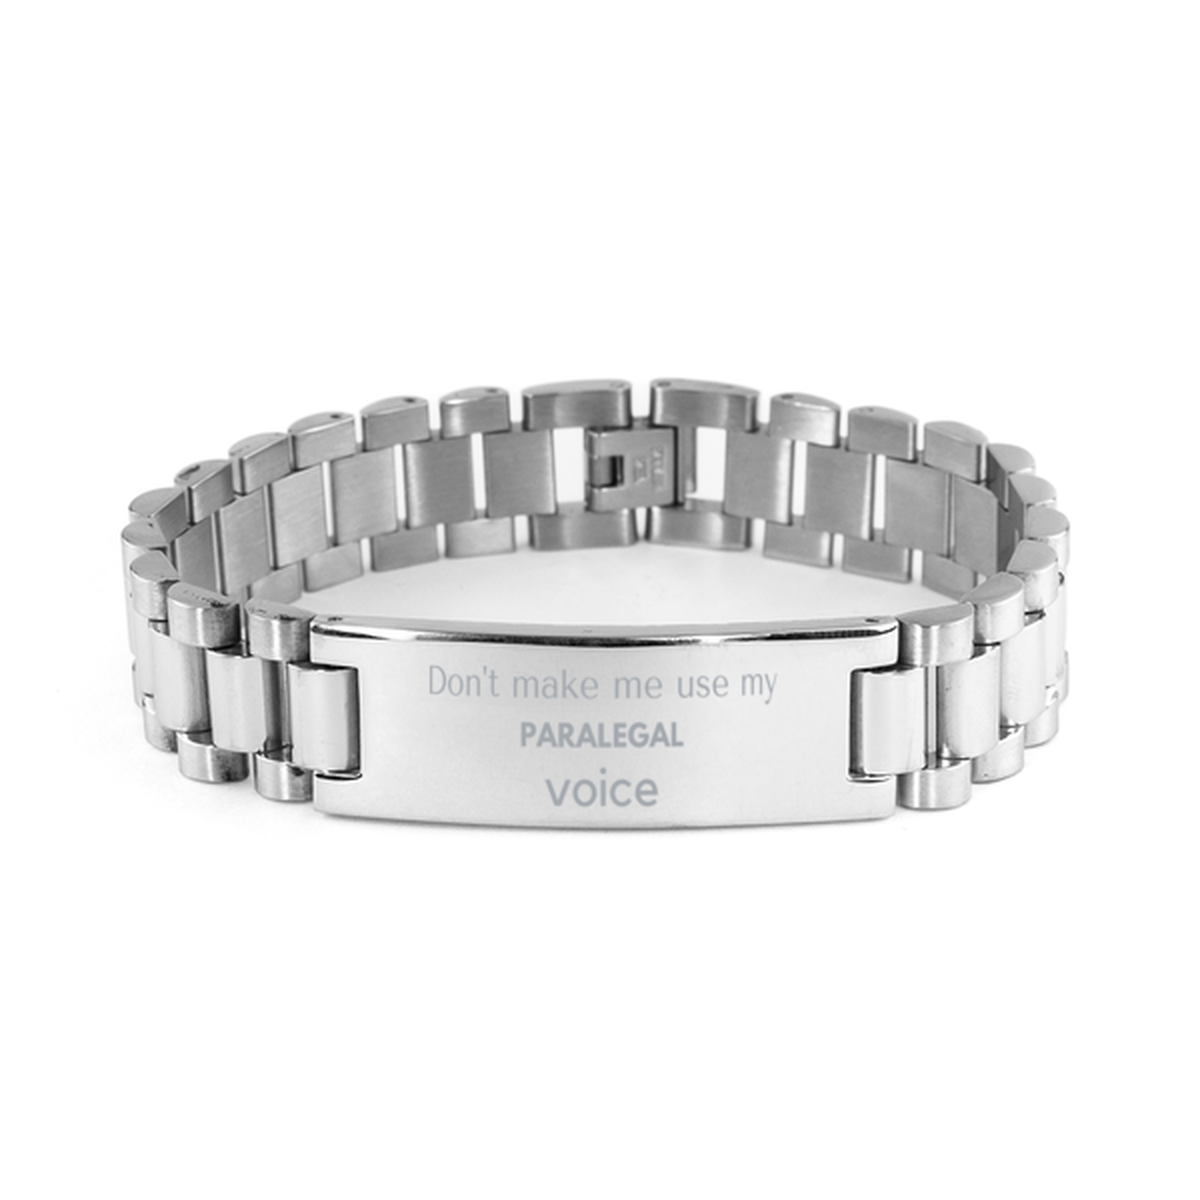 Don't make me use my Paralegal voice, Sarcasm Paralegal Gifts, Christmas Paralegal Ladder Stainless Steel Bracelet Birthday Unique Gifts For Paralegal Coworkers, Men, Women, Colleague, Friends